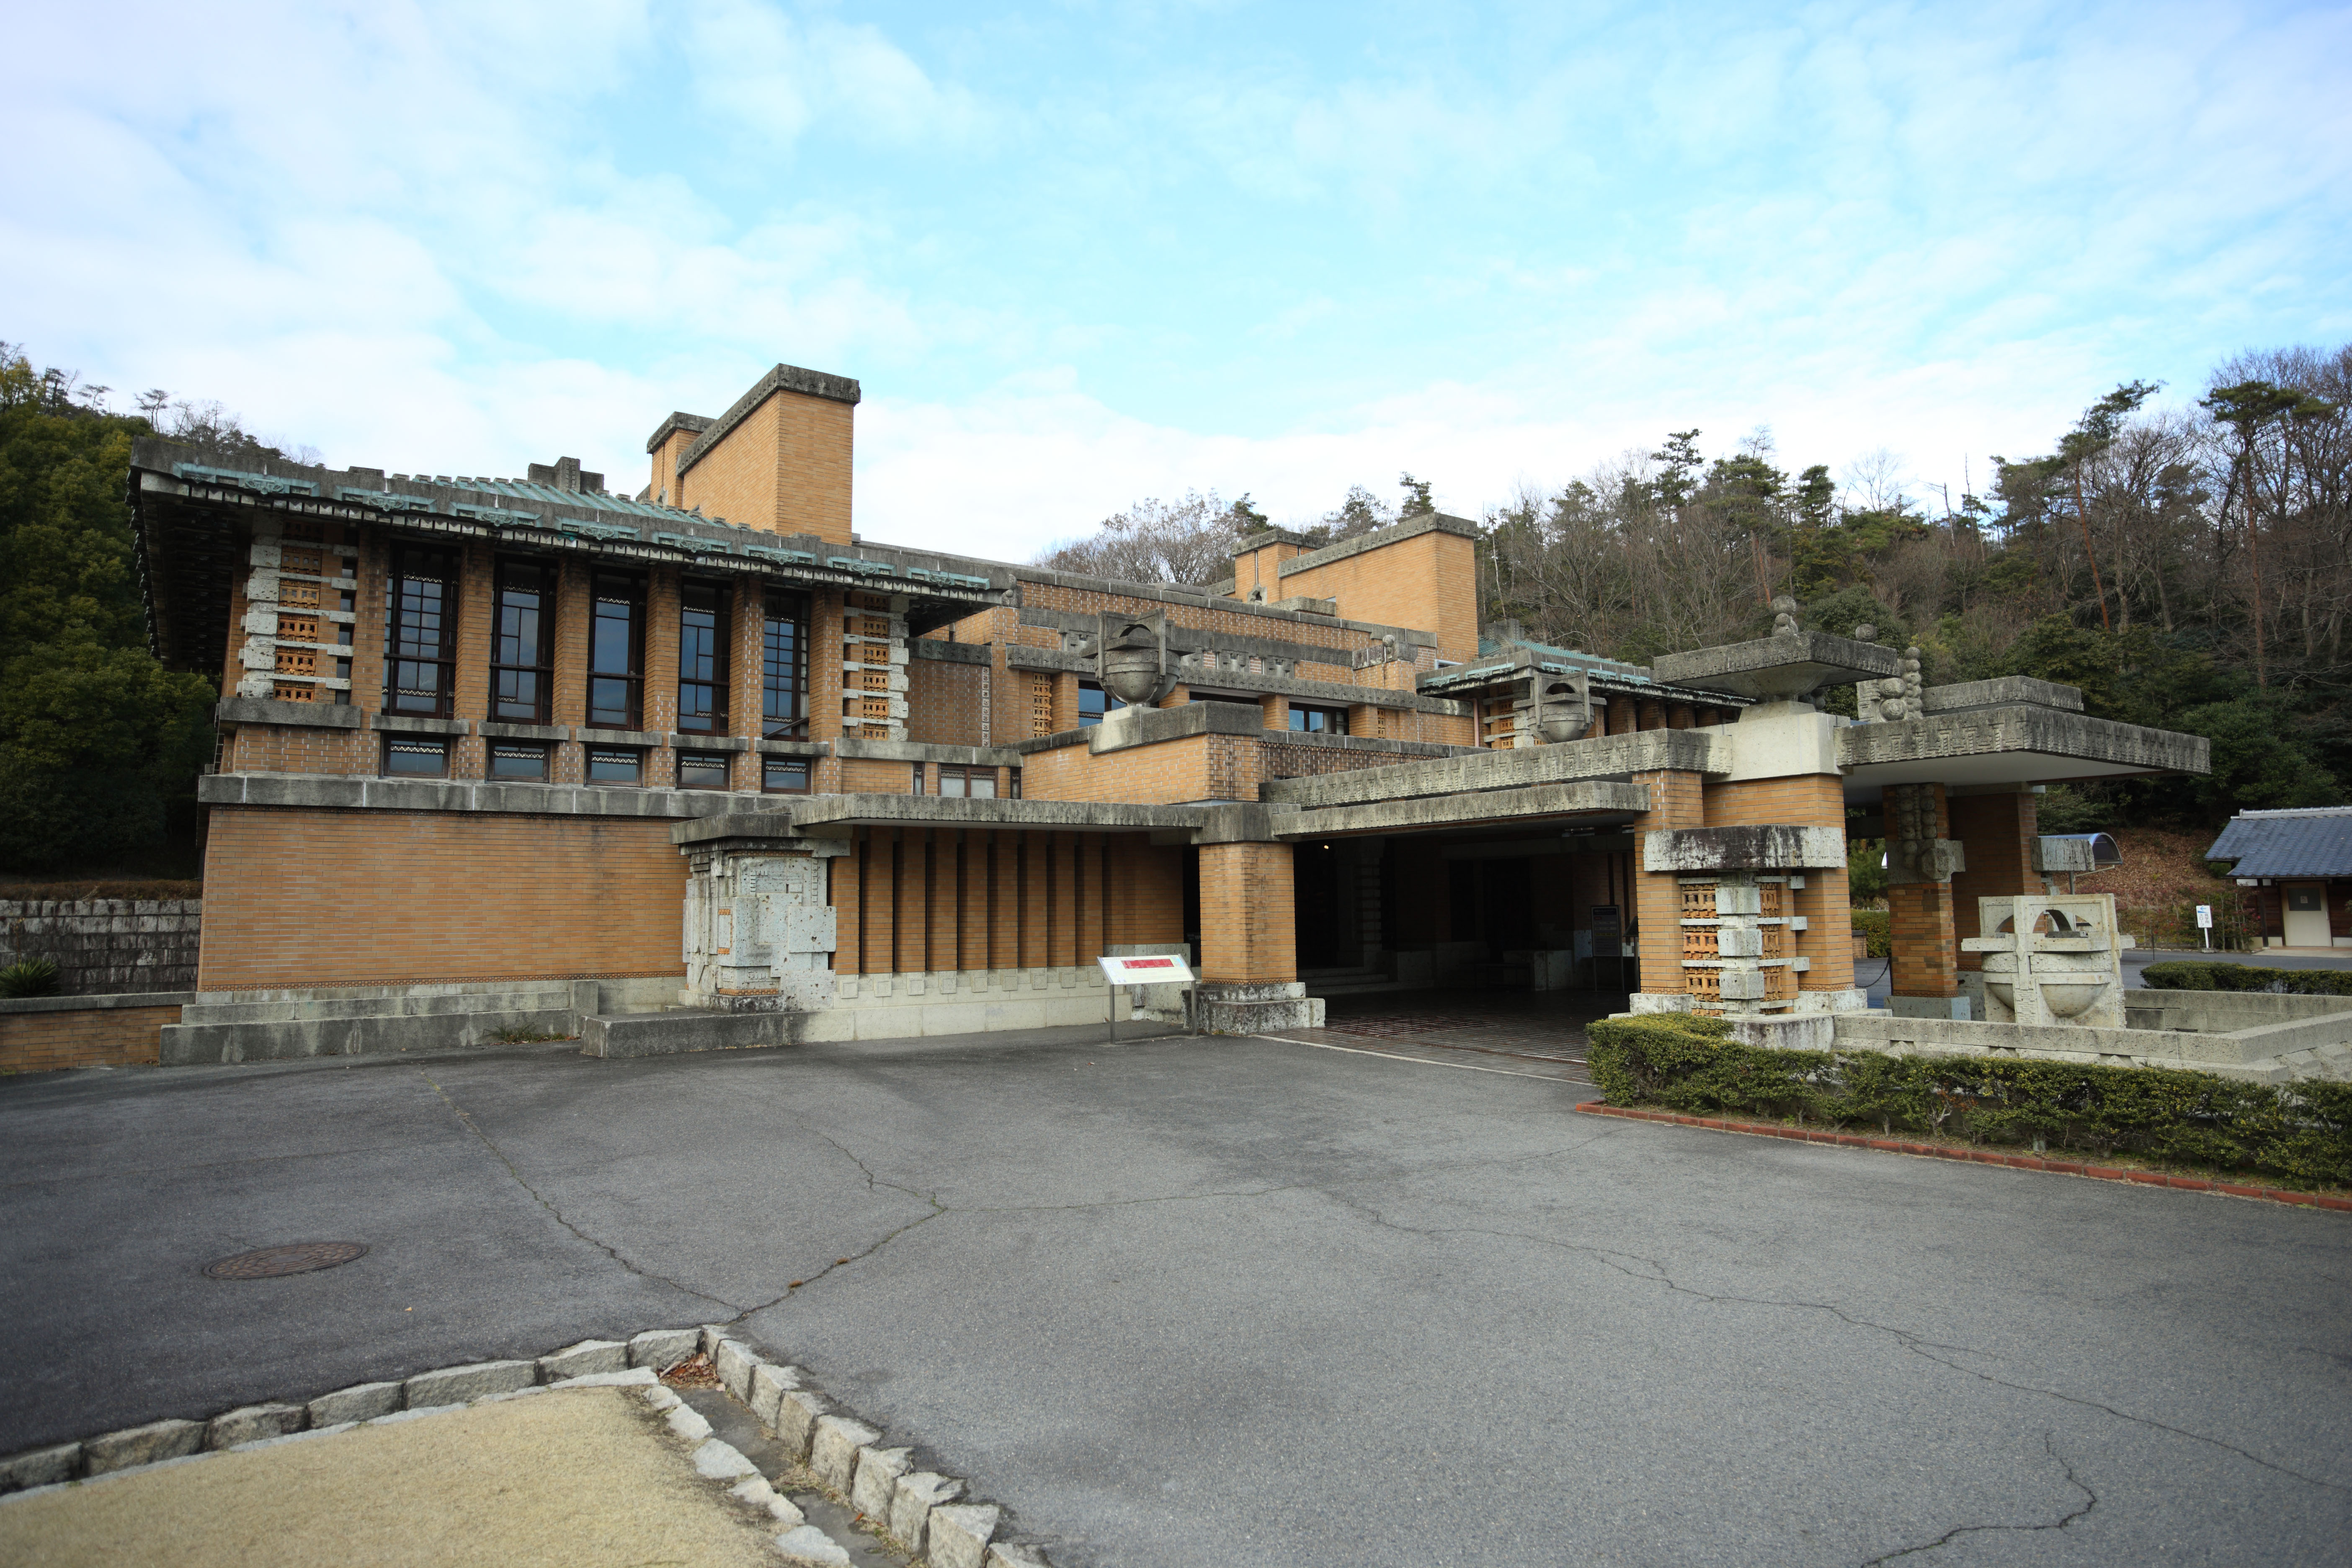 photo,material,free,landscape,picture,stock photo,Creative Commons,The Meiji-mura Village Museum Imperial Hotel center entrance, building of the Meiji, The Westernization, Western-style building, Cultural heritage